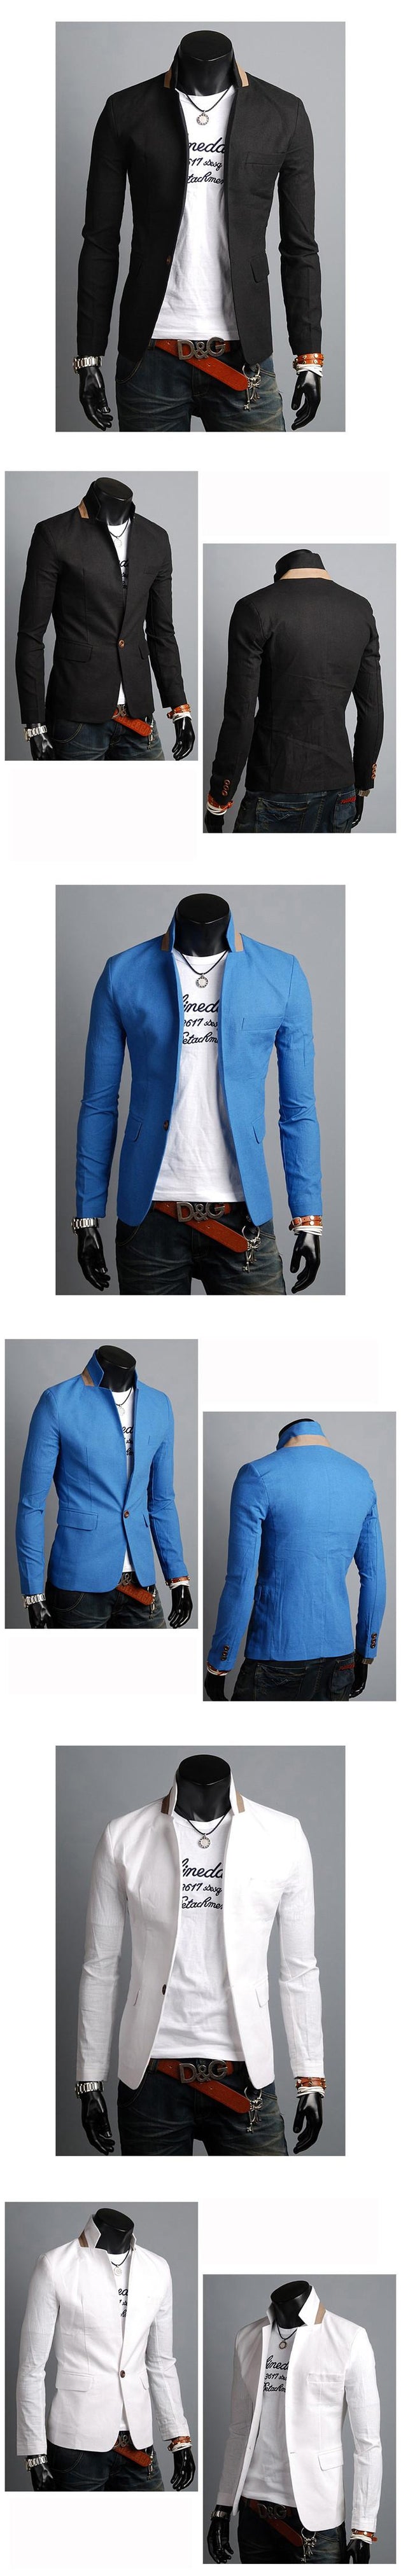 Men's Fashion Casual Suit Jacket With Colored Collar - TrendSettingFashions 